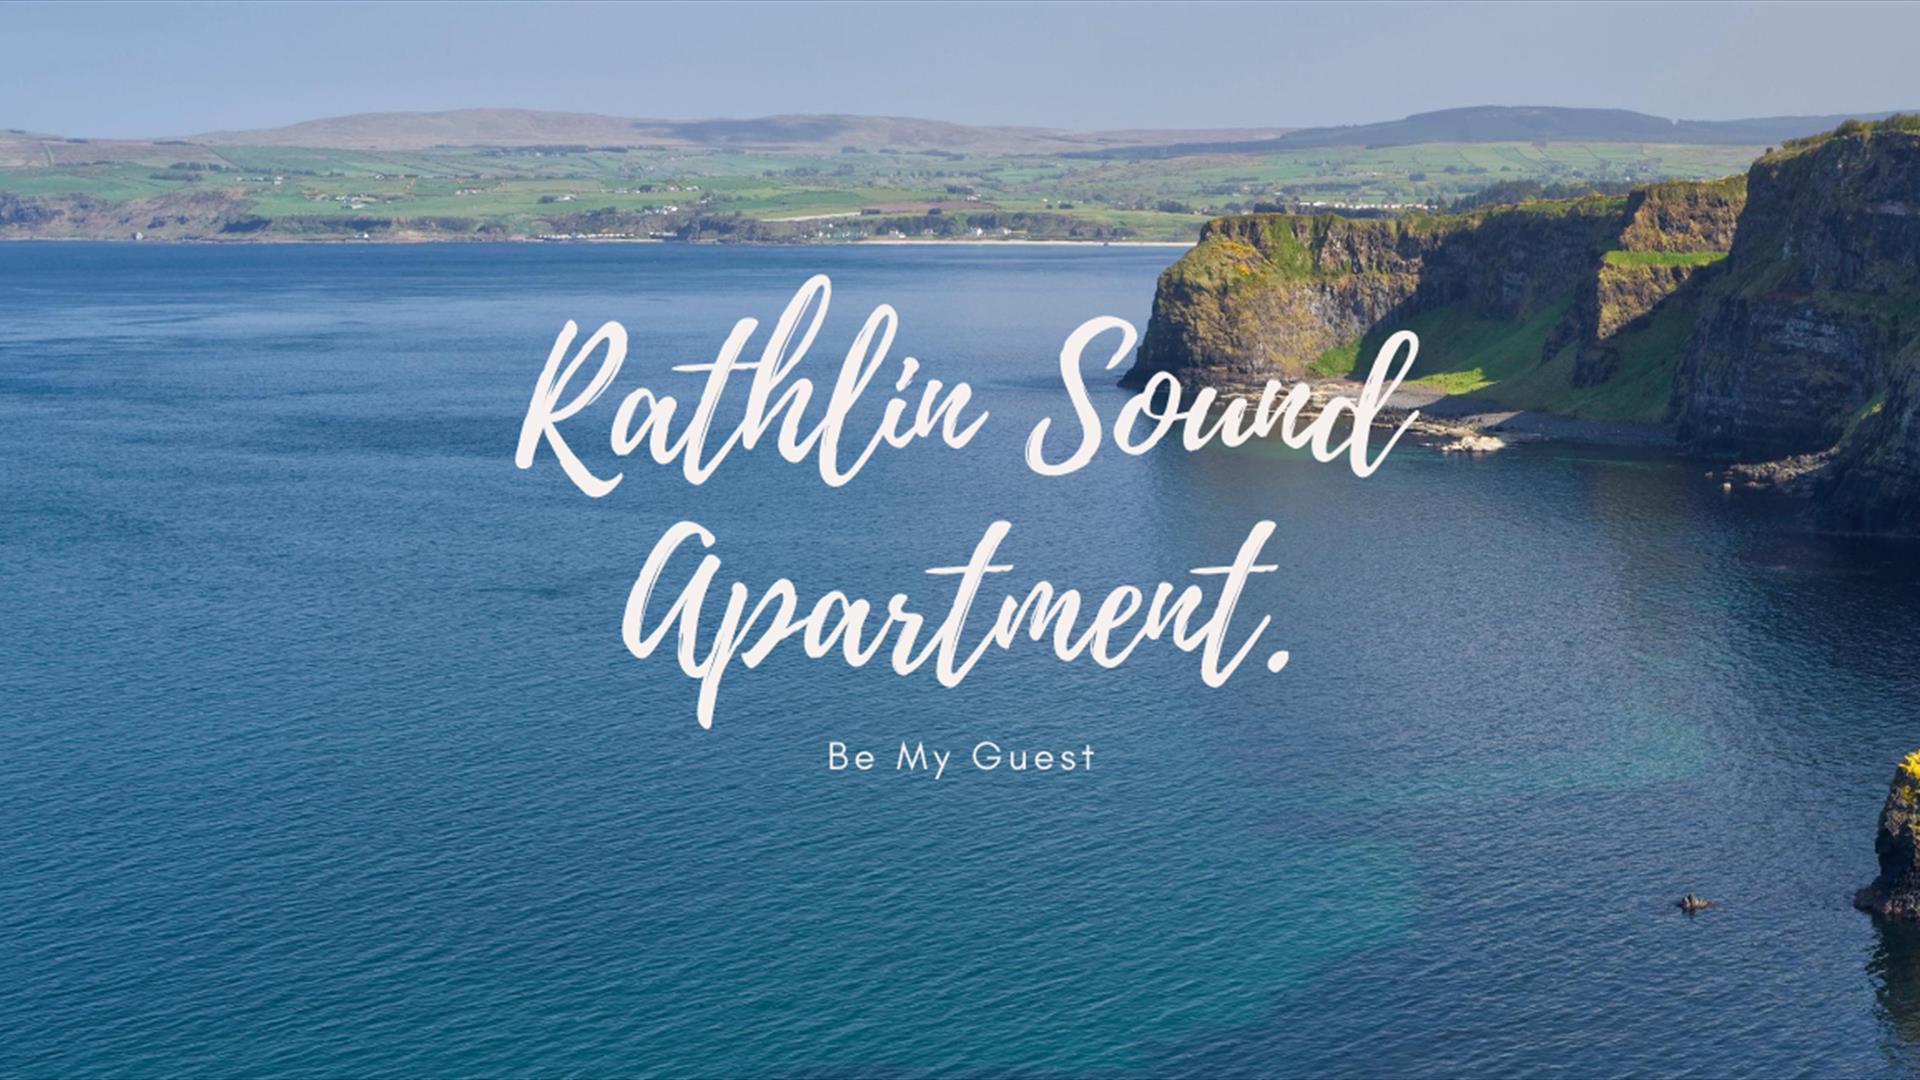 Come be our guest at Rathlin Sound Apartment